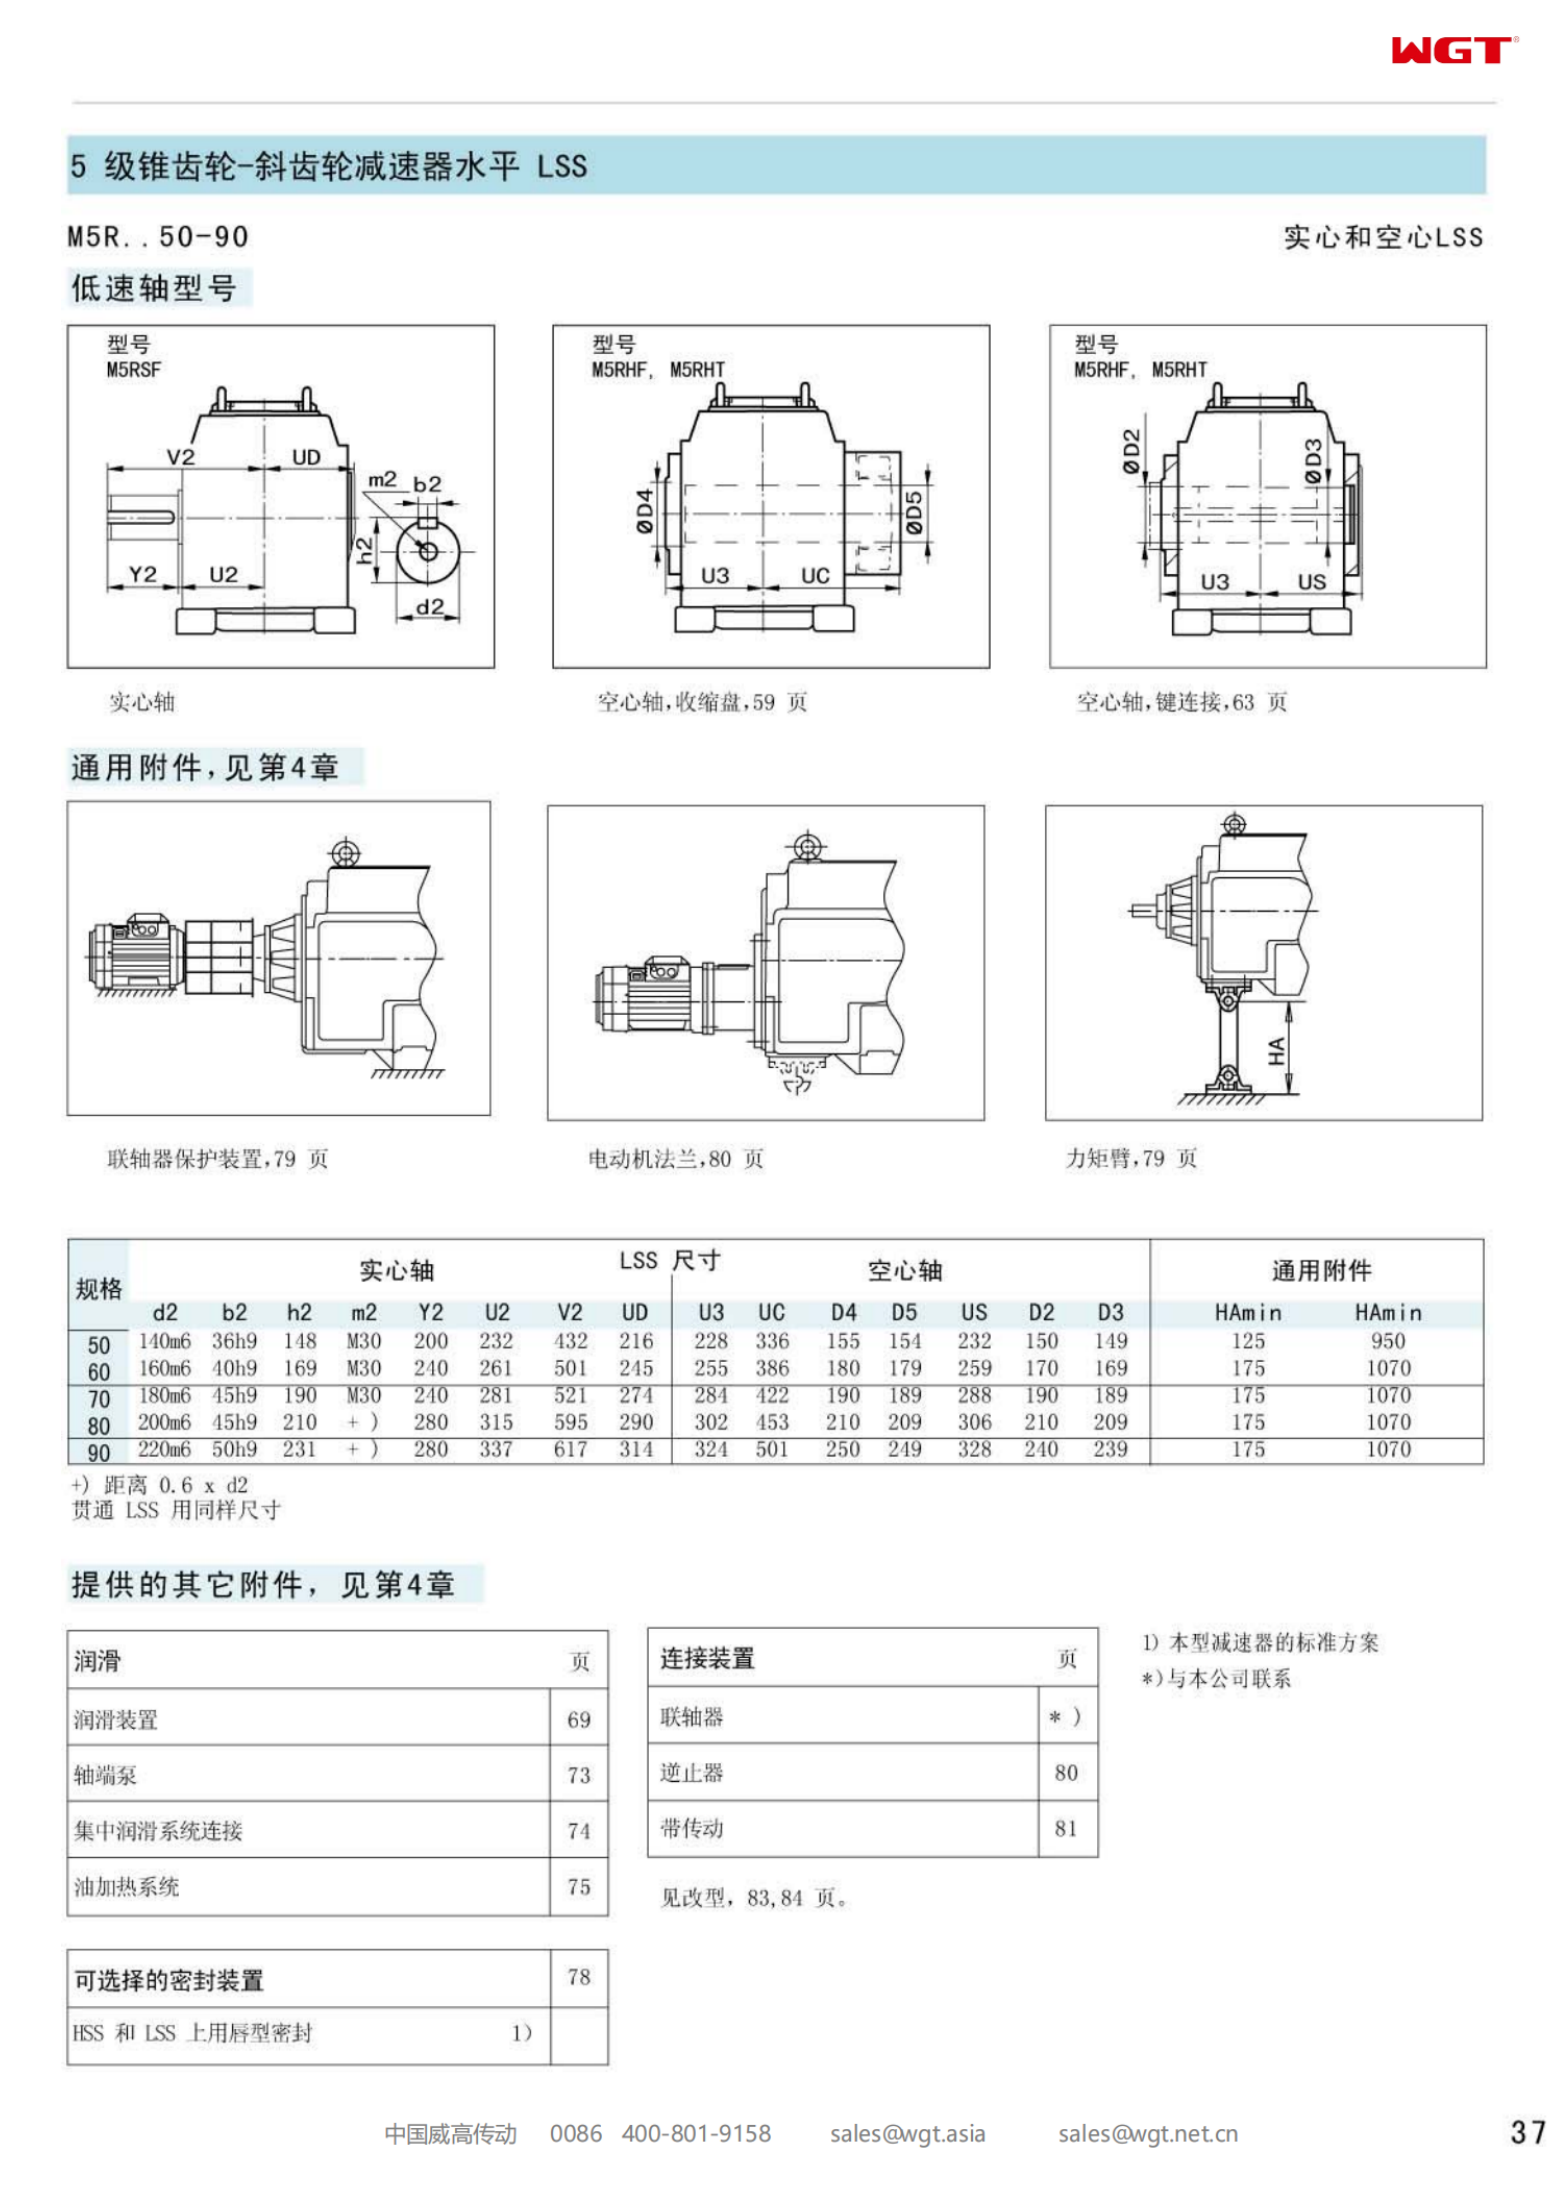 M5RHT50 Replace_SEW_M_Series Gearbox